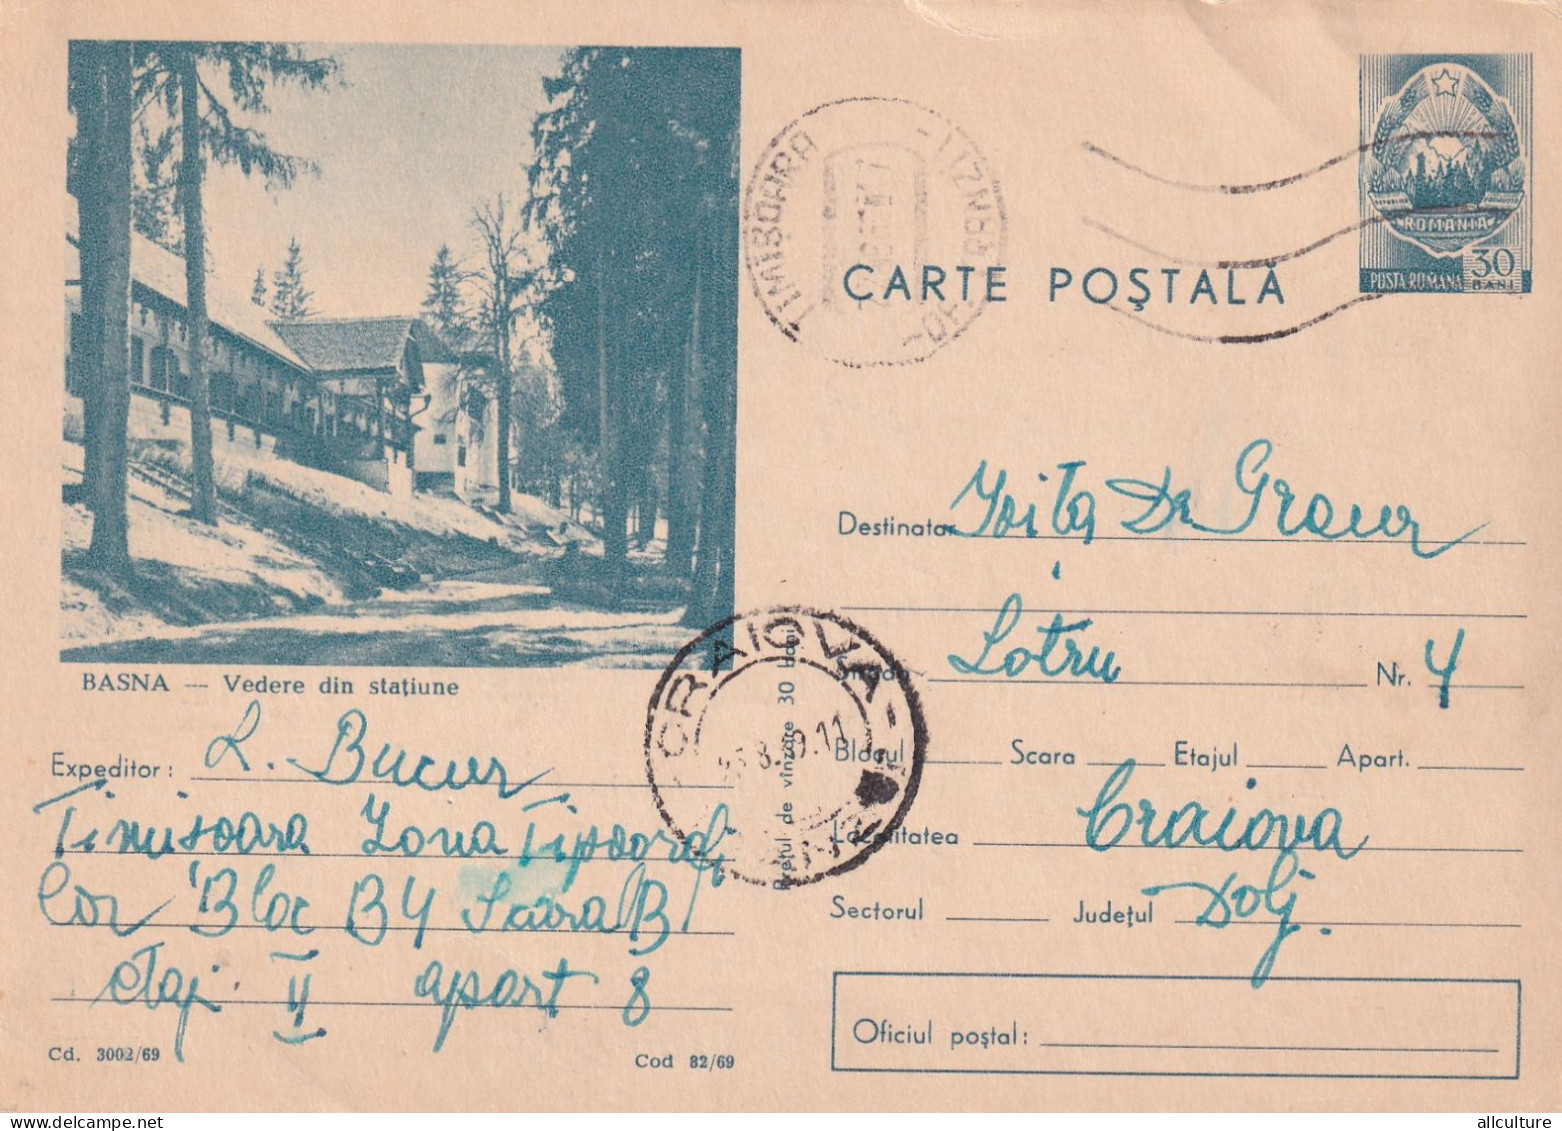 A24464 - BASNA View From The Resort Mountain  Postal Stationery  Romania 1969 - Ganzsachen